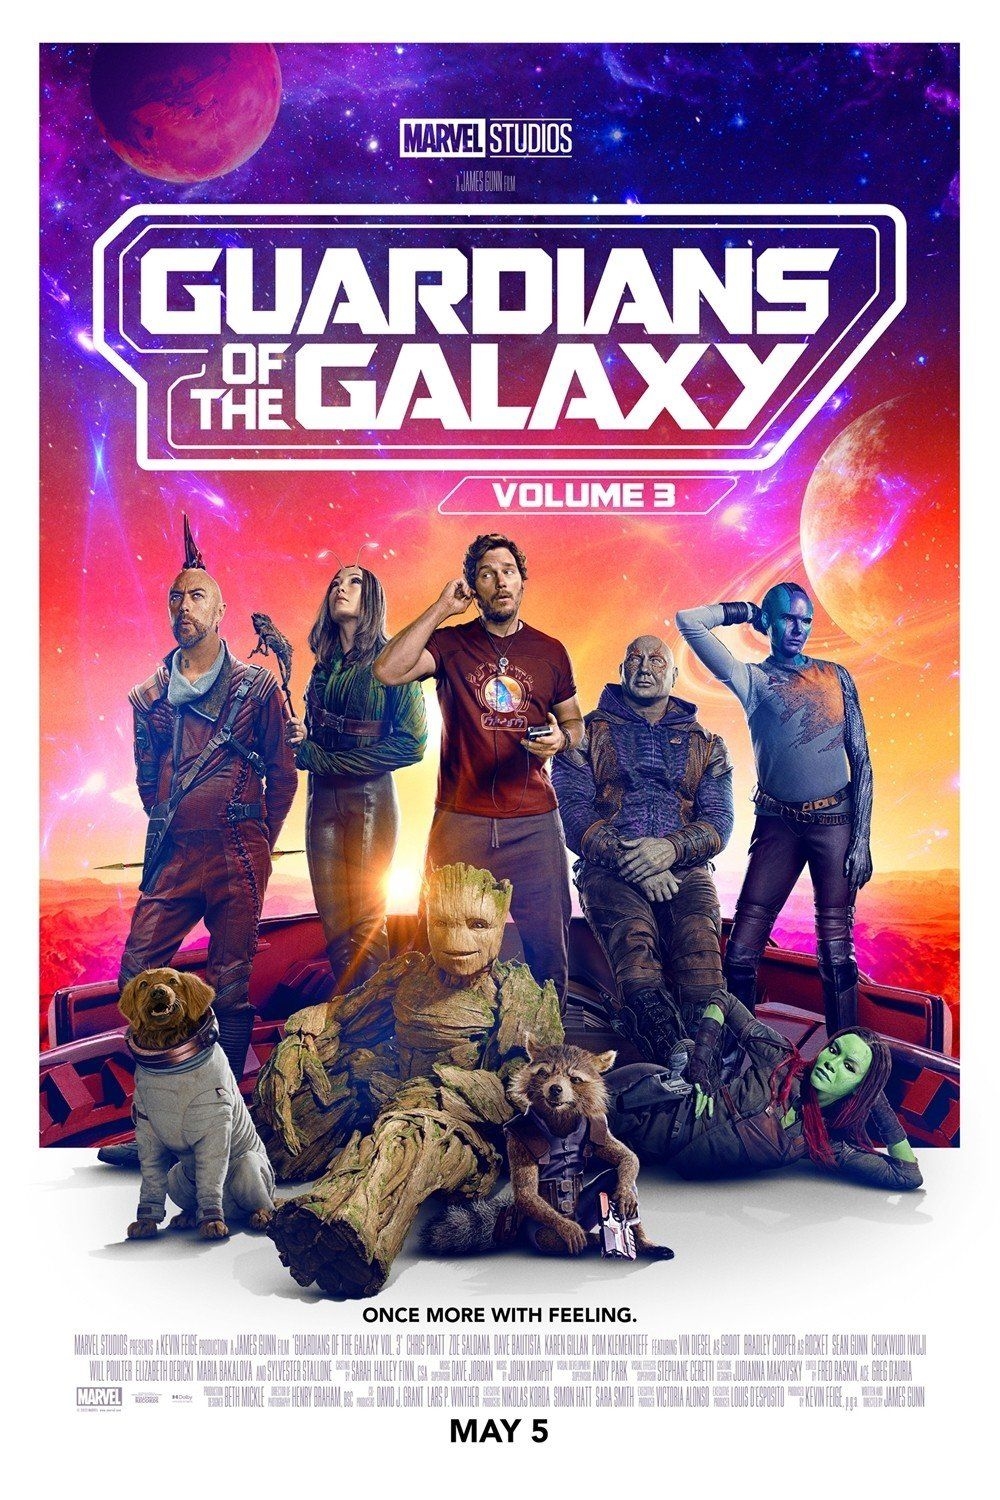 Guardians of the Galaxy Vol. 3 3D Poster